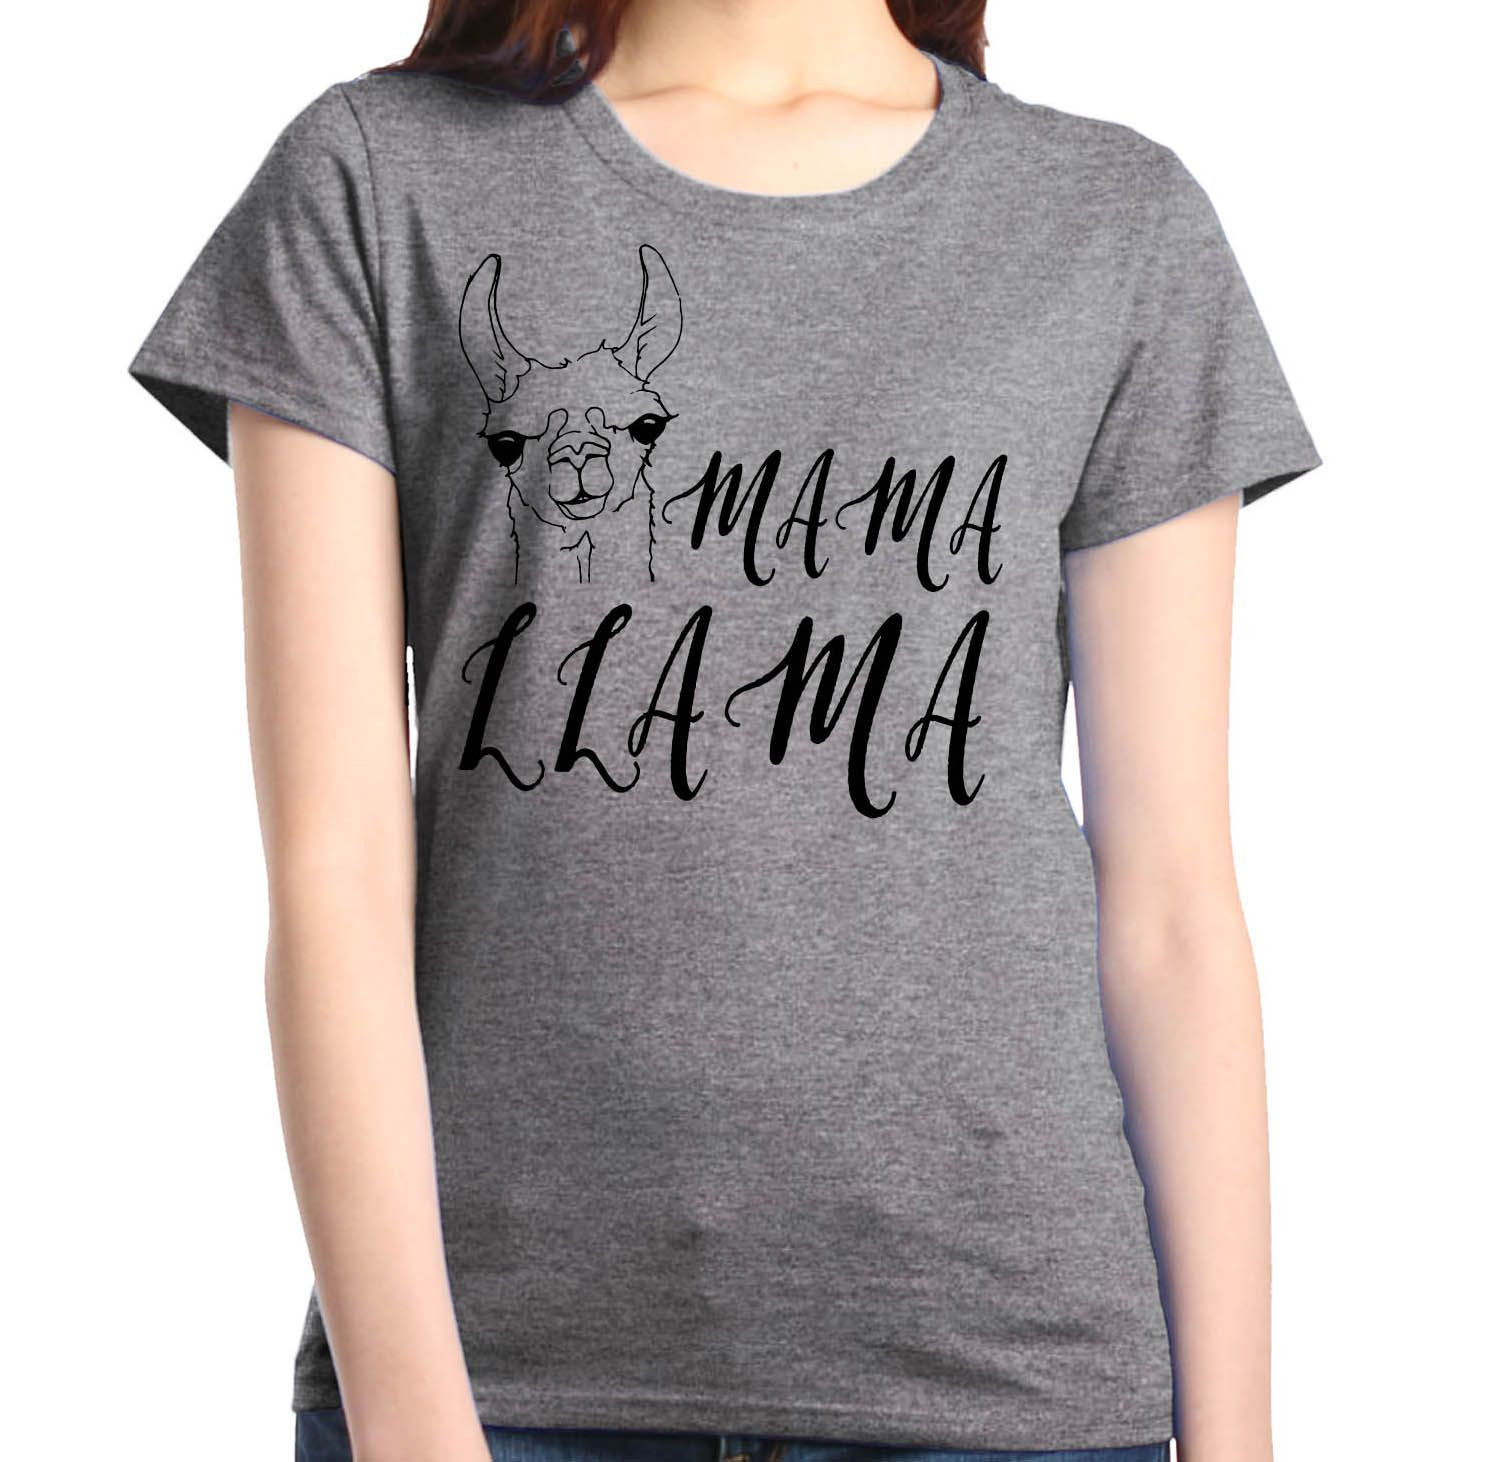 Mother's Day Gifts From Infants
 Mama Llama Women s T Shirt Mother s Day Day Gift Birthday